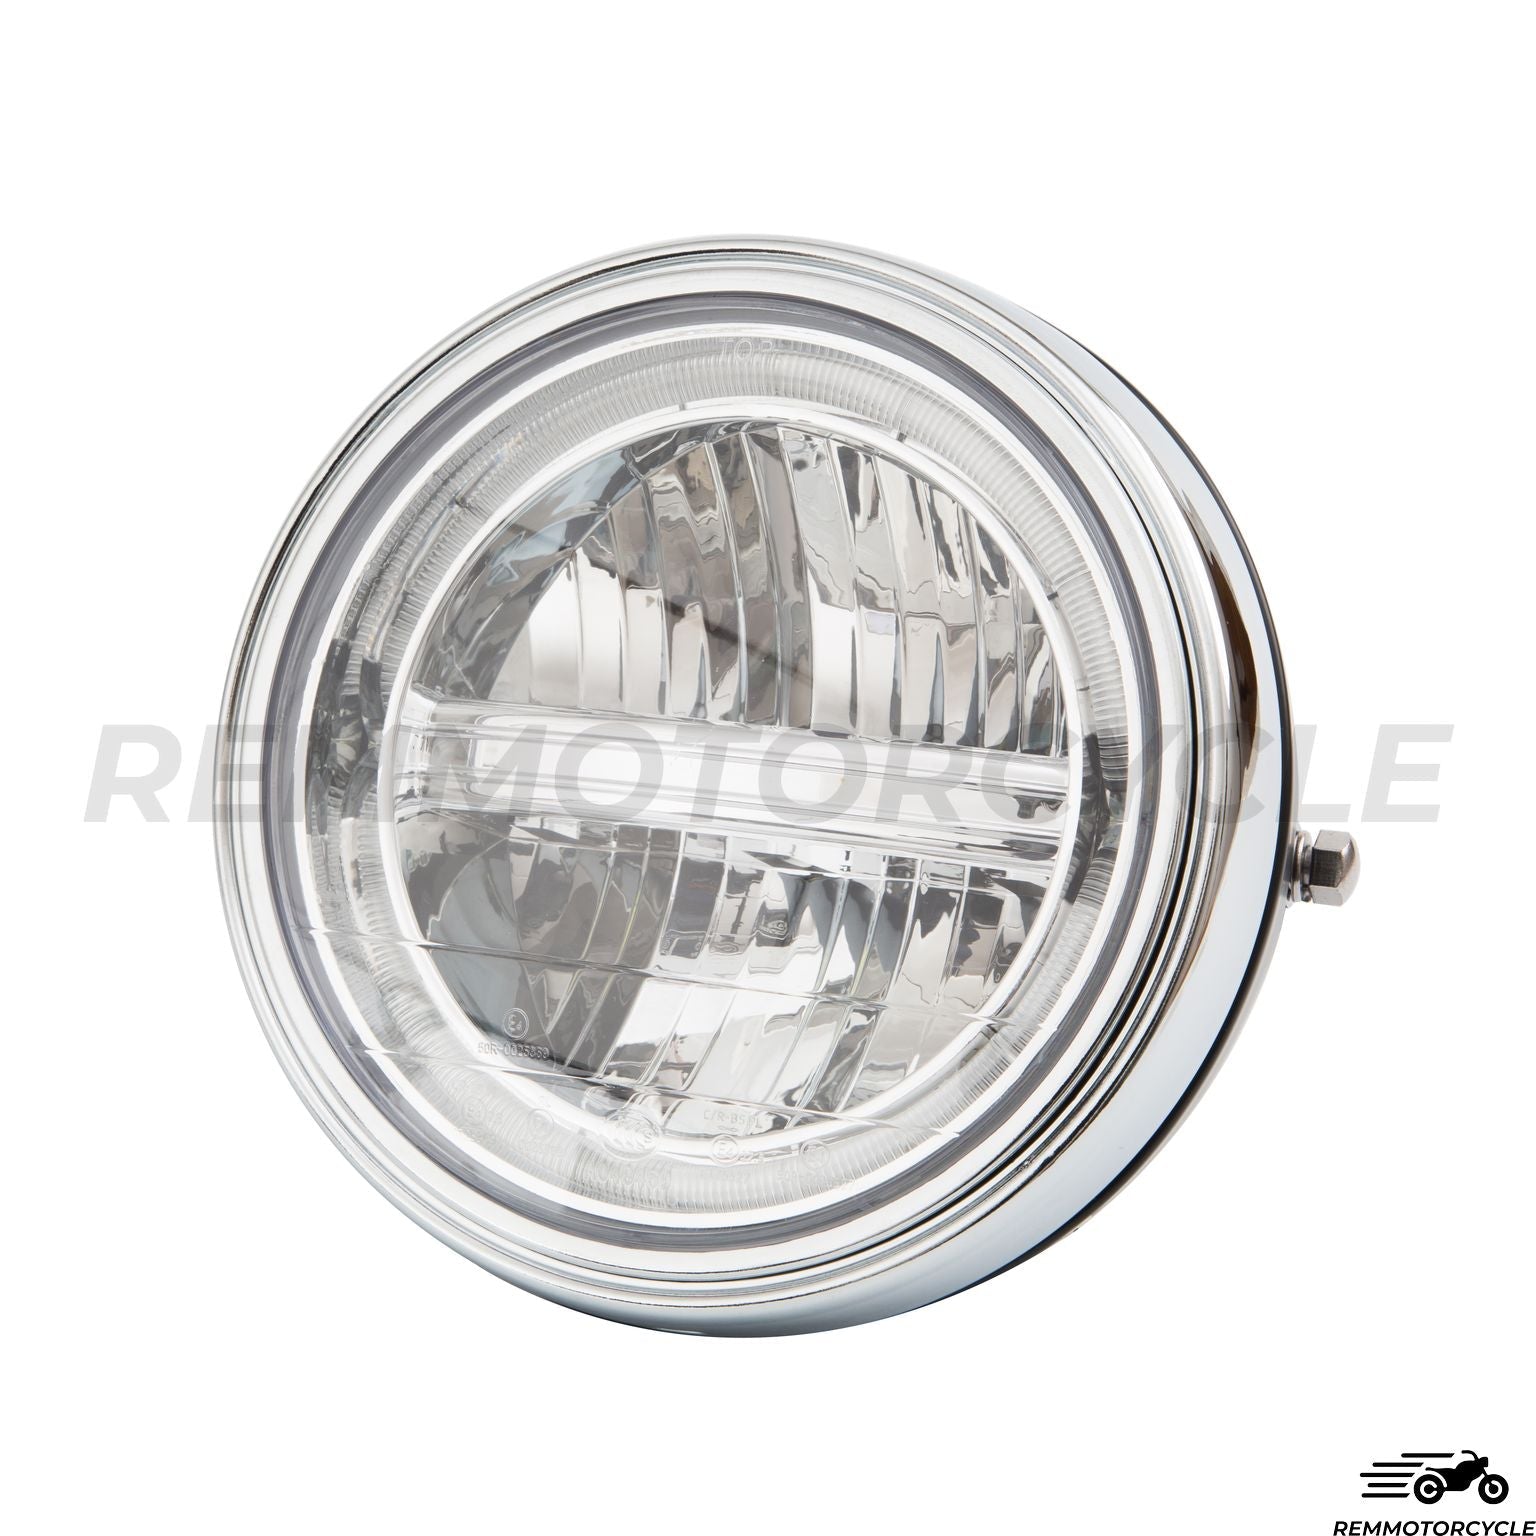 Approved 8.2" LED Motorcycle Headlight